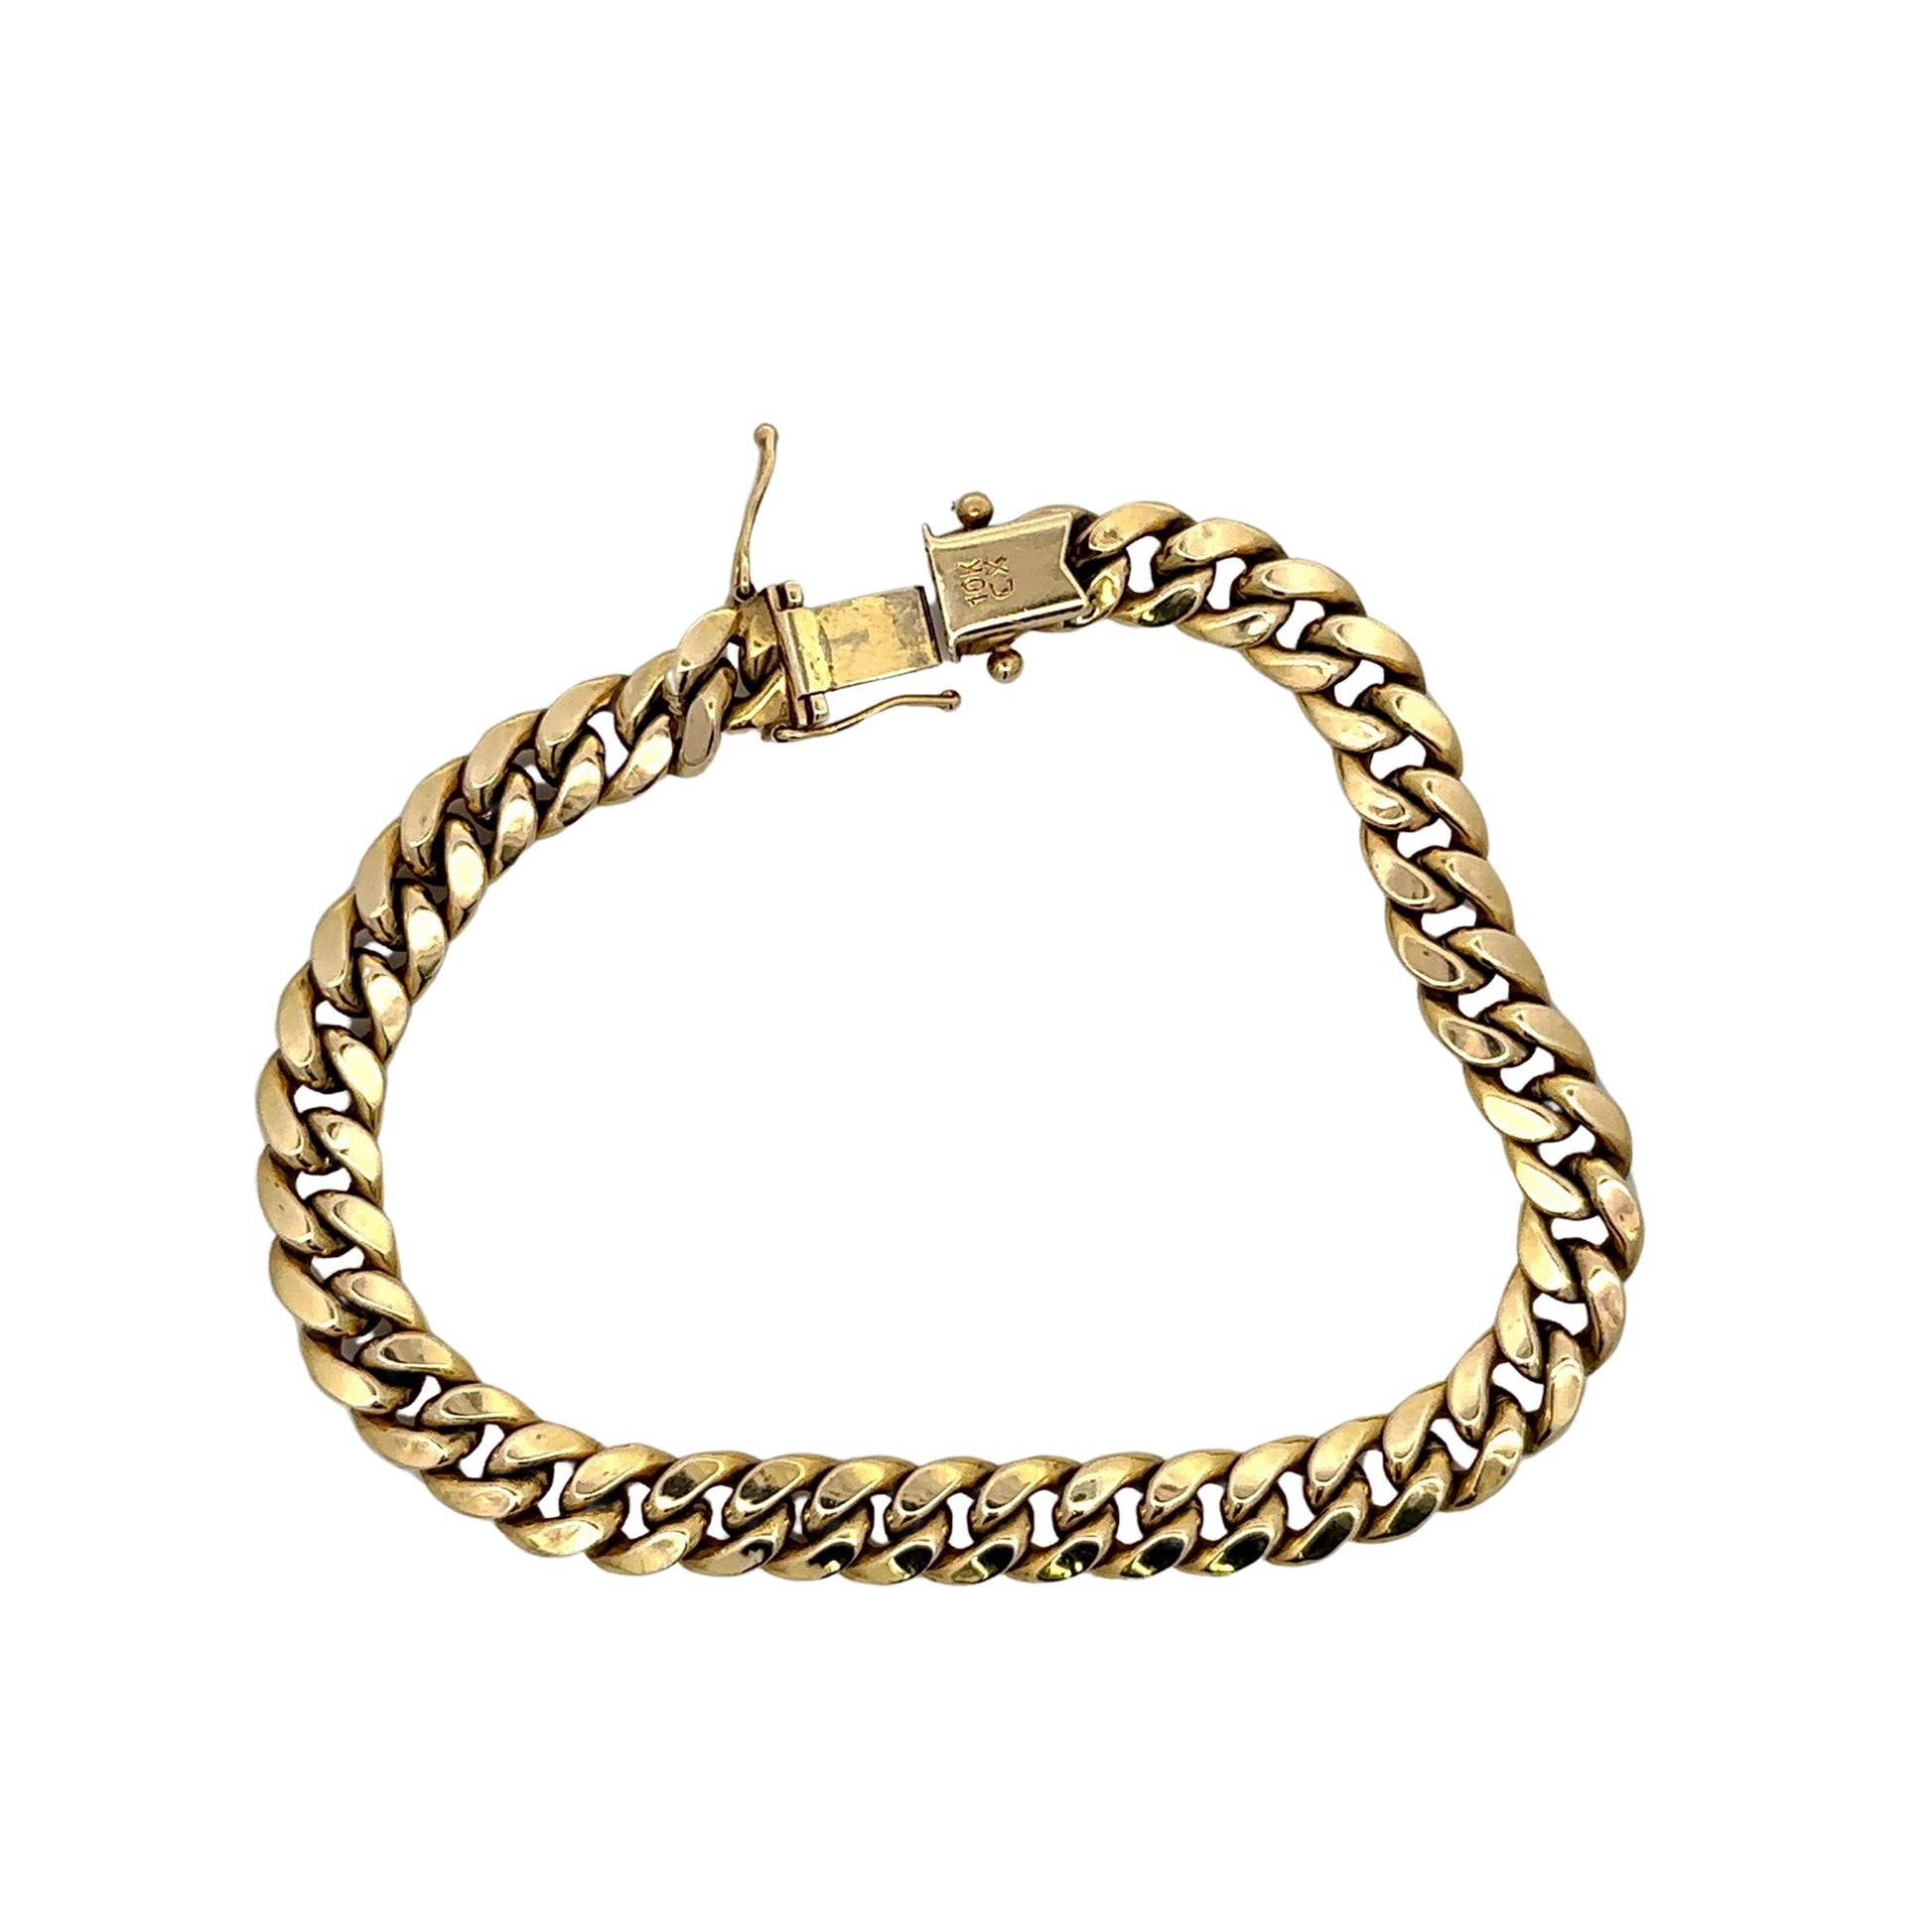 Back of yellow gold cuban link bracelet with 10K stamp on clasp